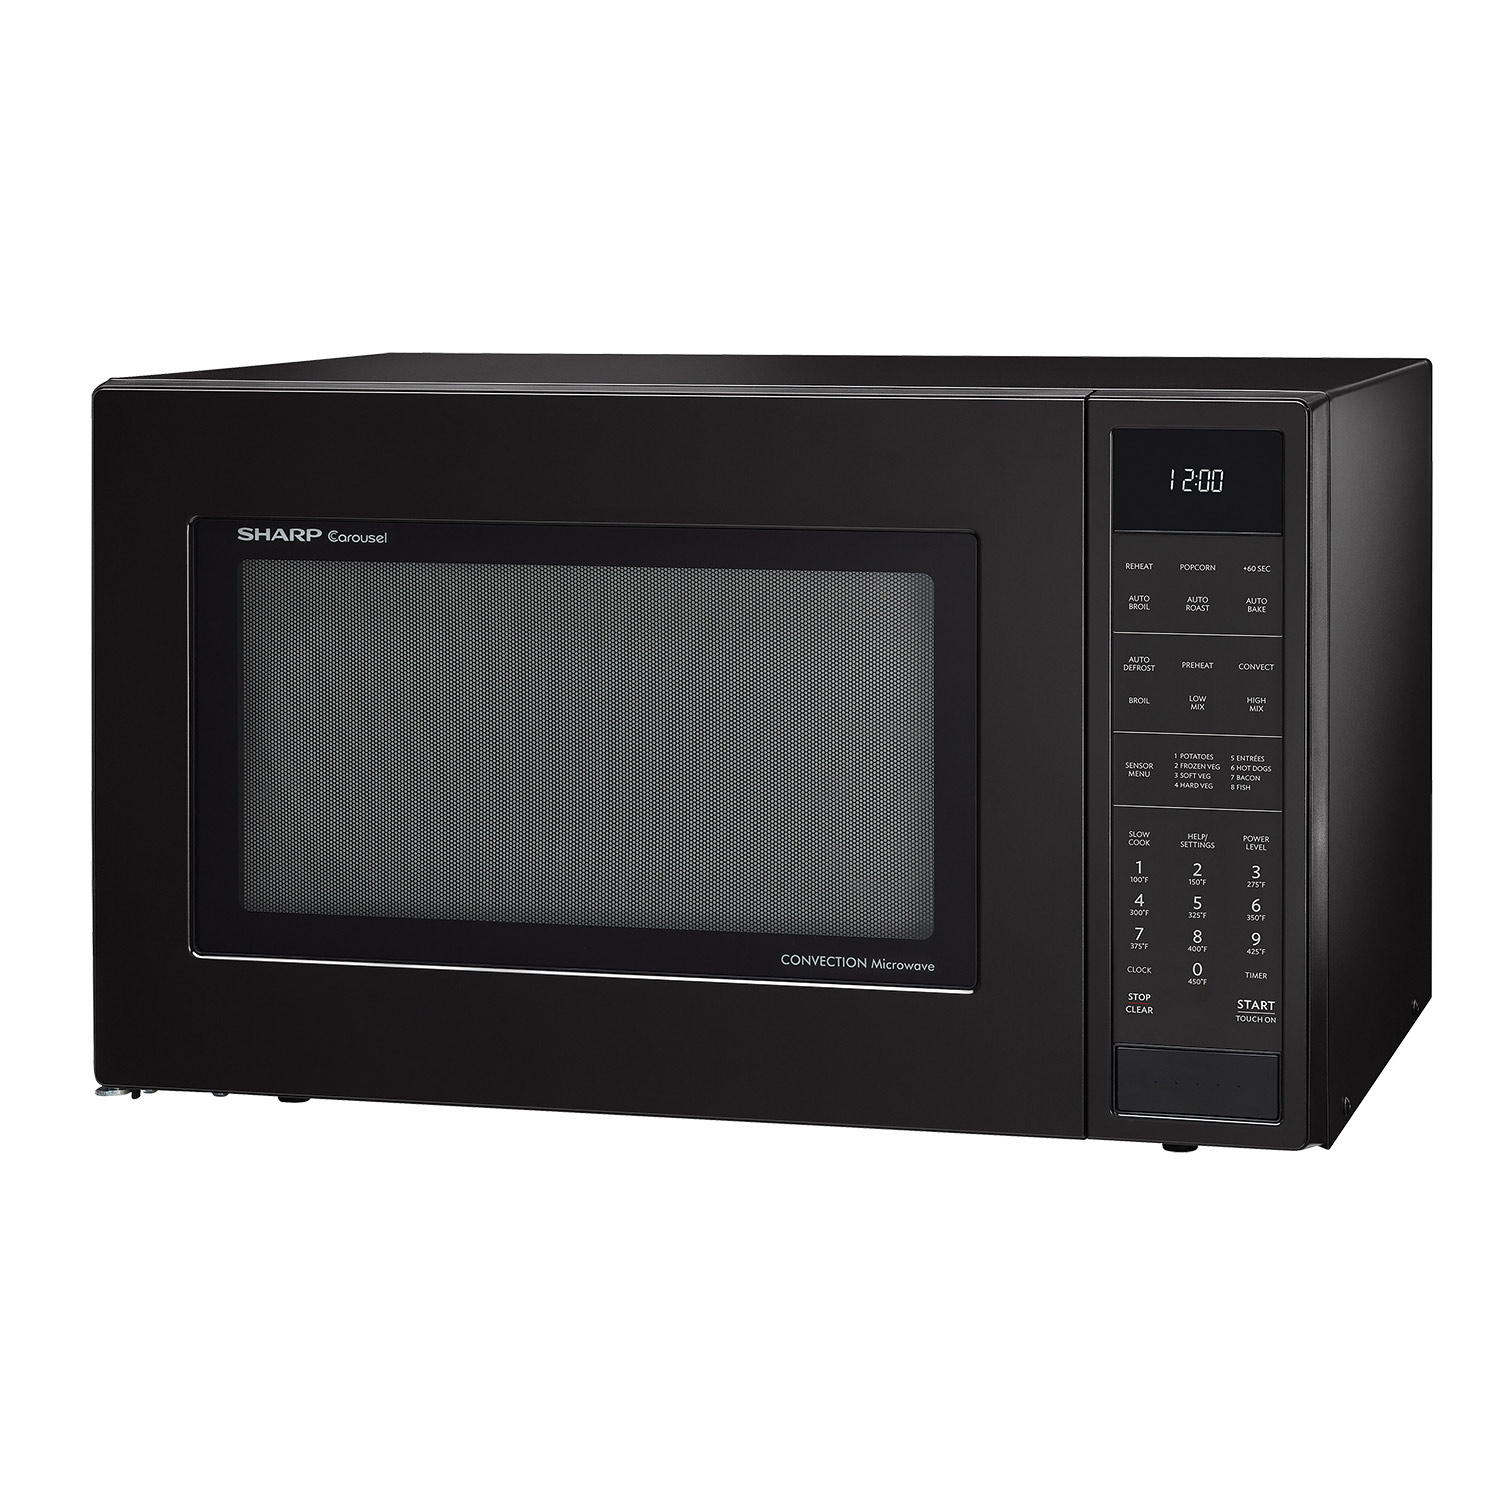 13 Best 0.9 Cubic Foot Microwave Oven for 2023